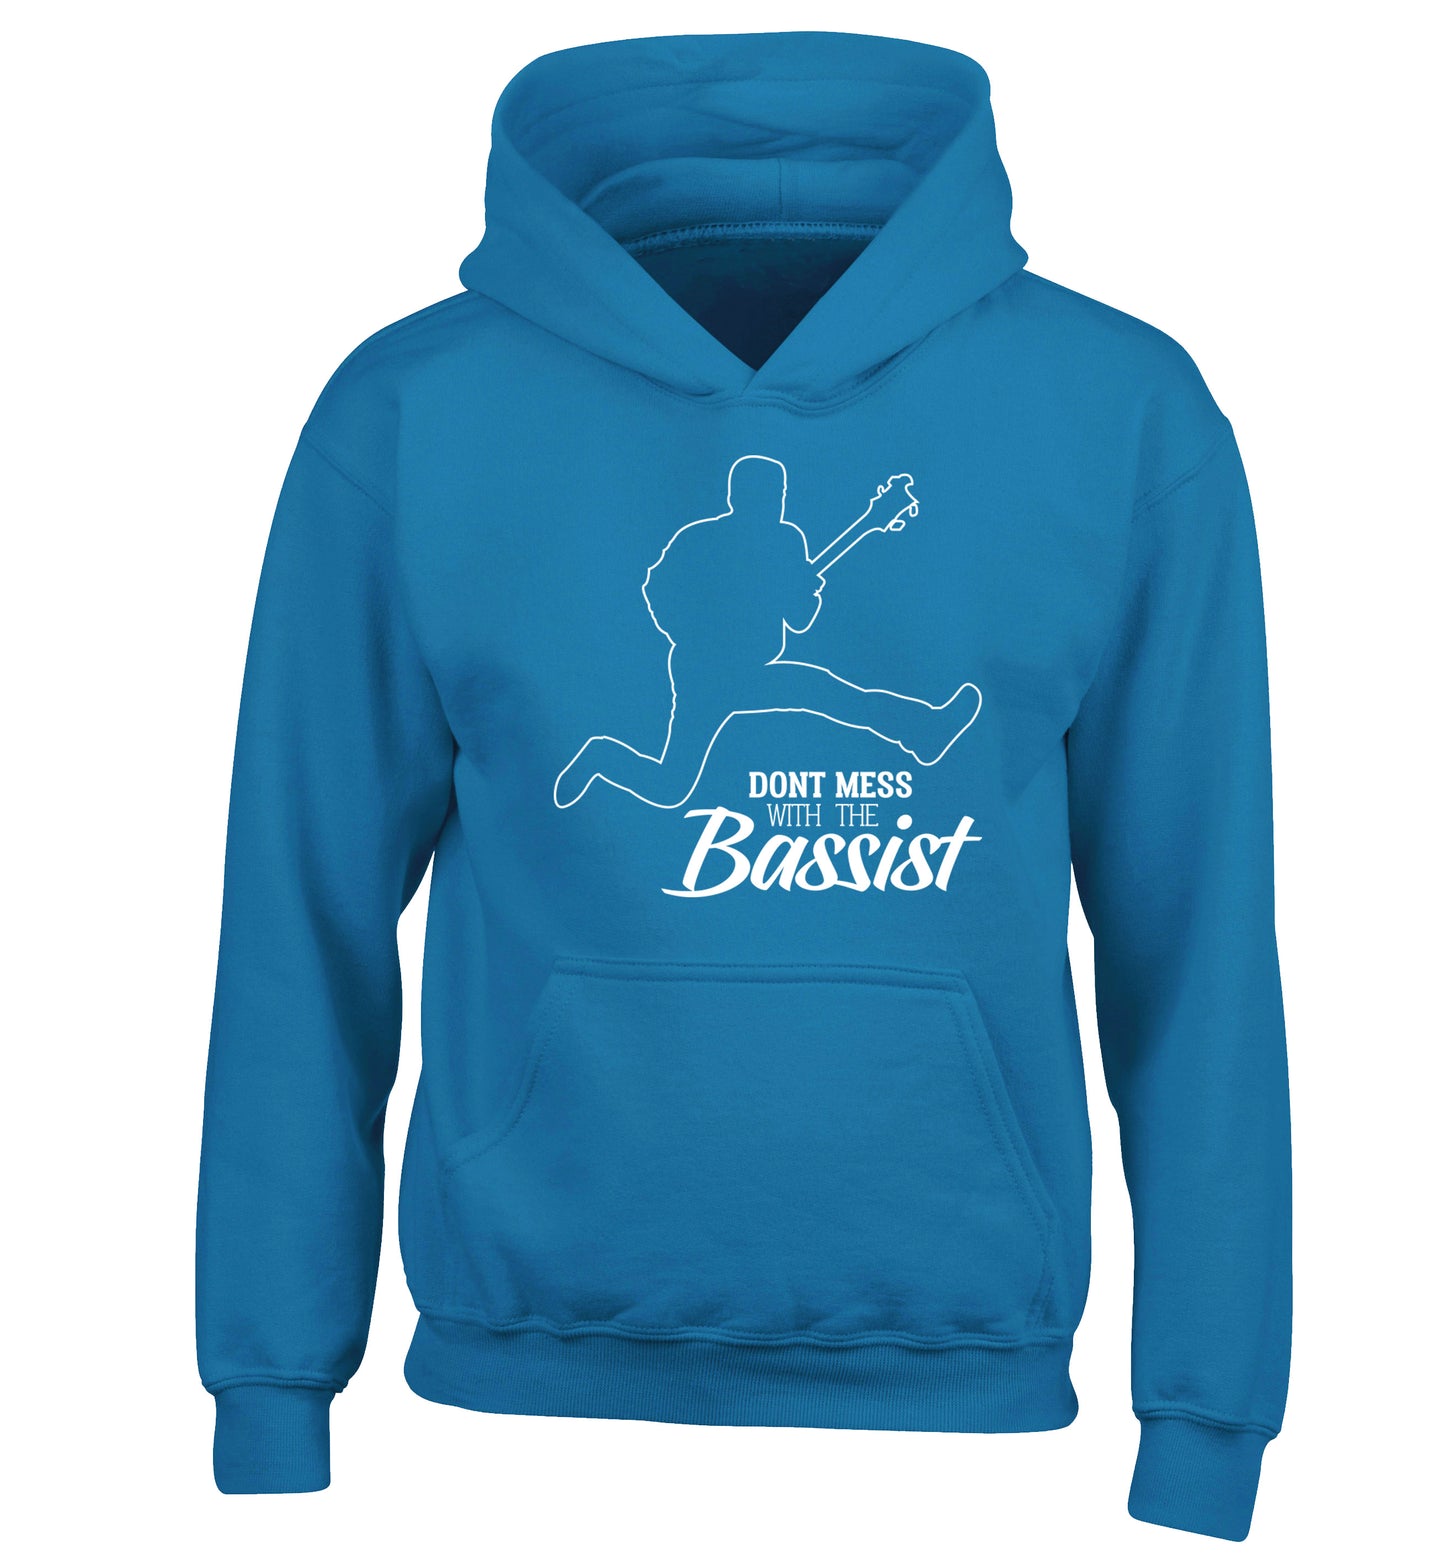 Dont mess with the bassist children's blue hoodie 12-13 Years